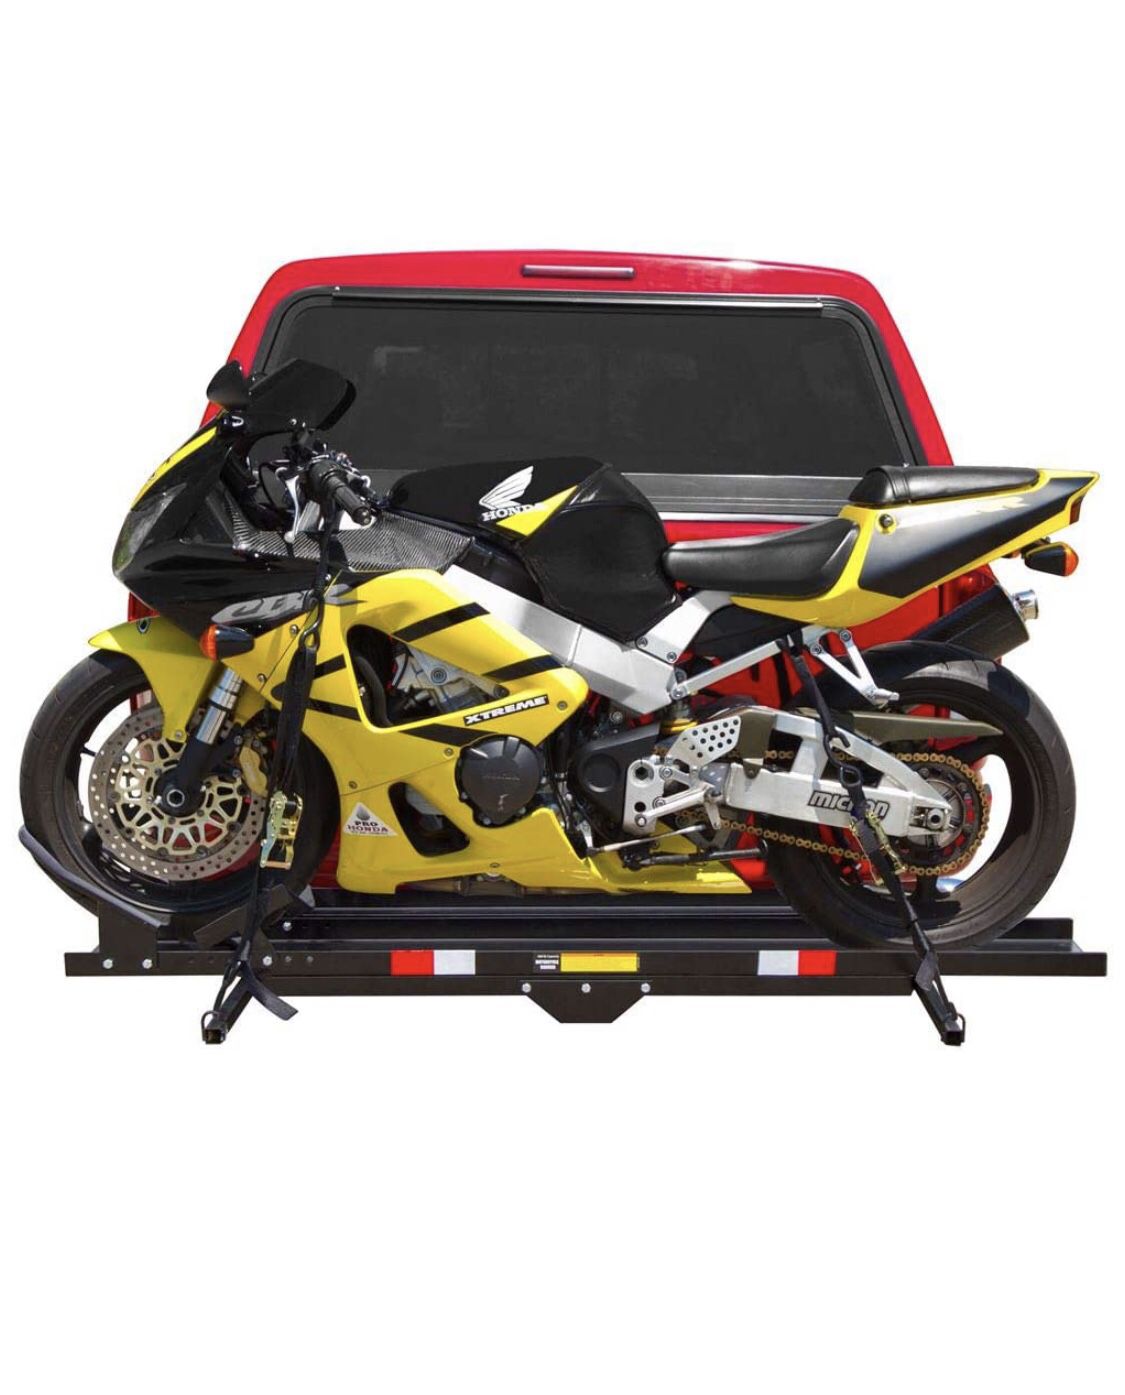 Motorcycle Carrier/Trailer Rated 600lbs